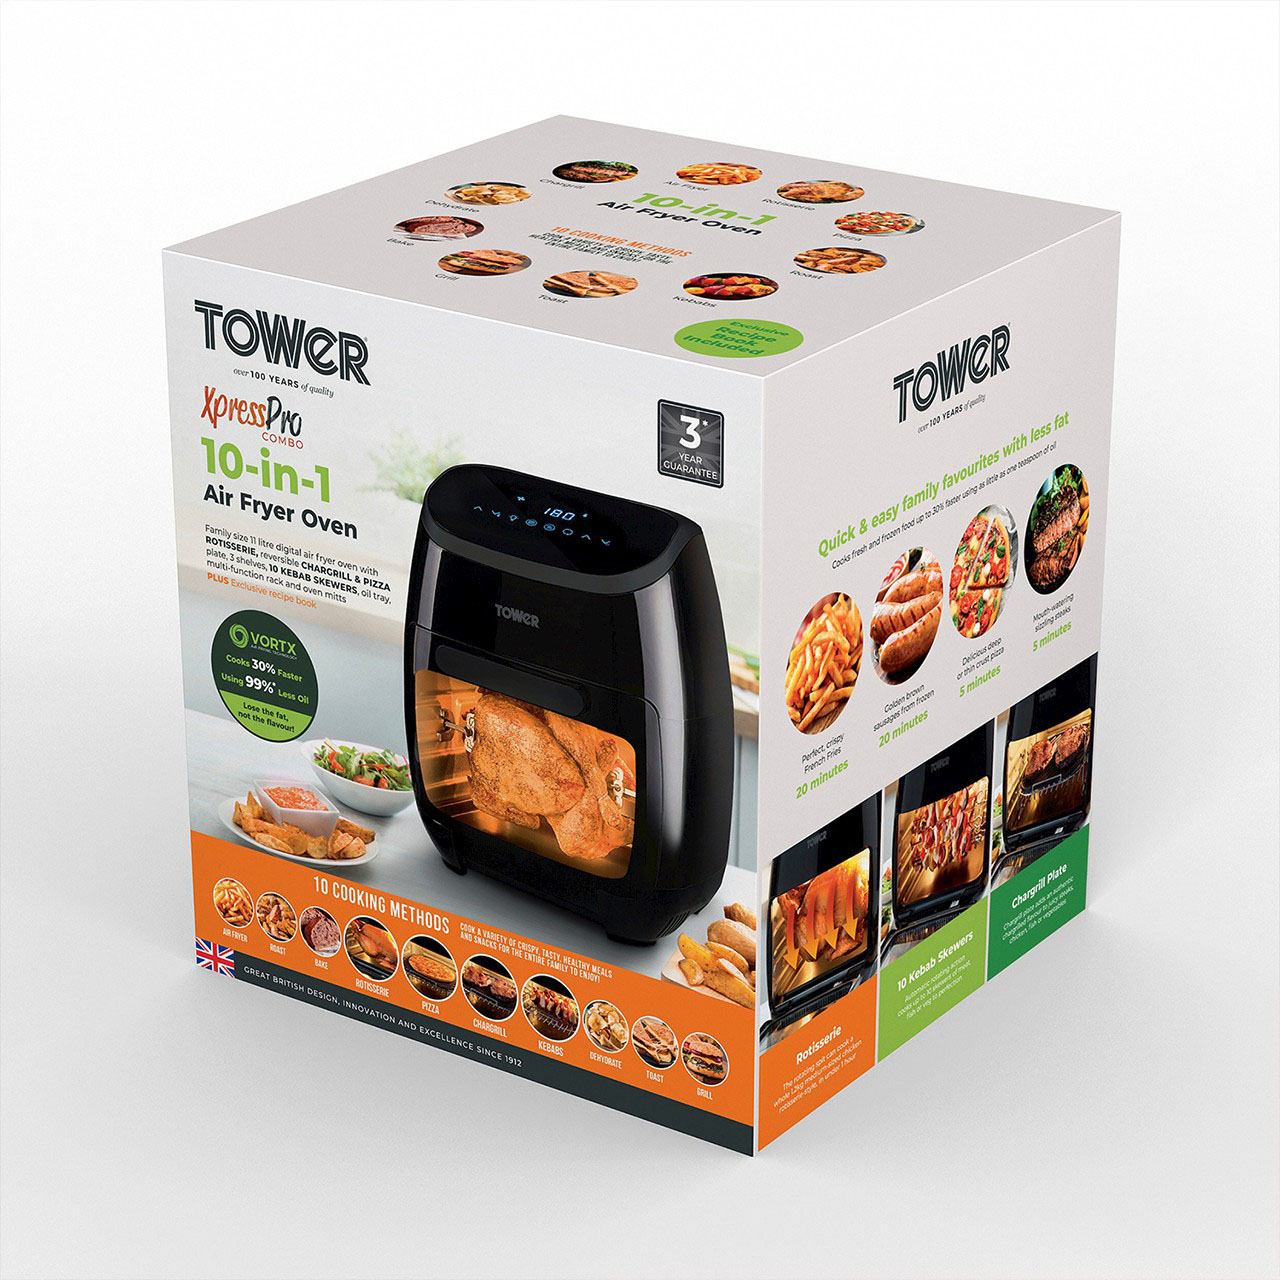 Tower Xpress Pro 11 Litre 10-in-1 Digital Air Fryer Oven with Rotisserie